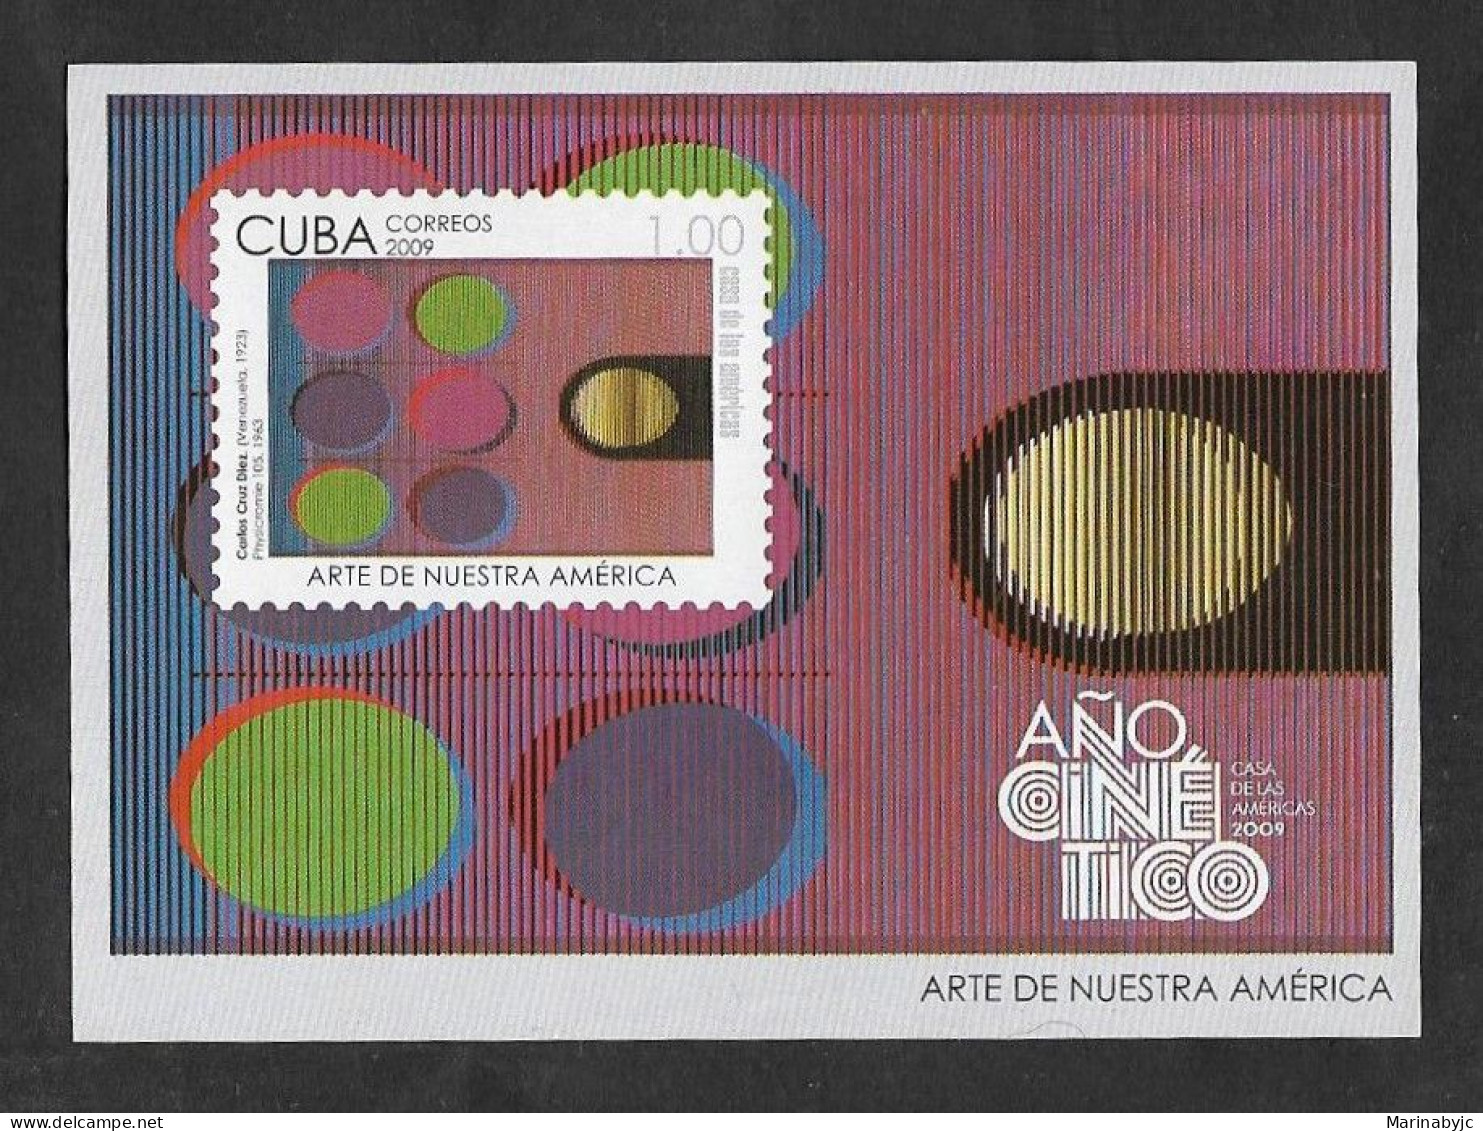 SE)2009 CUBA, FROM THE CINETIC ART SERIES, HOUSE OF THE AMERICAS, SS, MNH - Usati